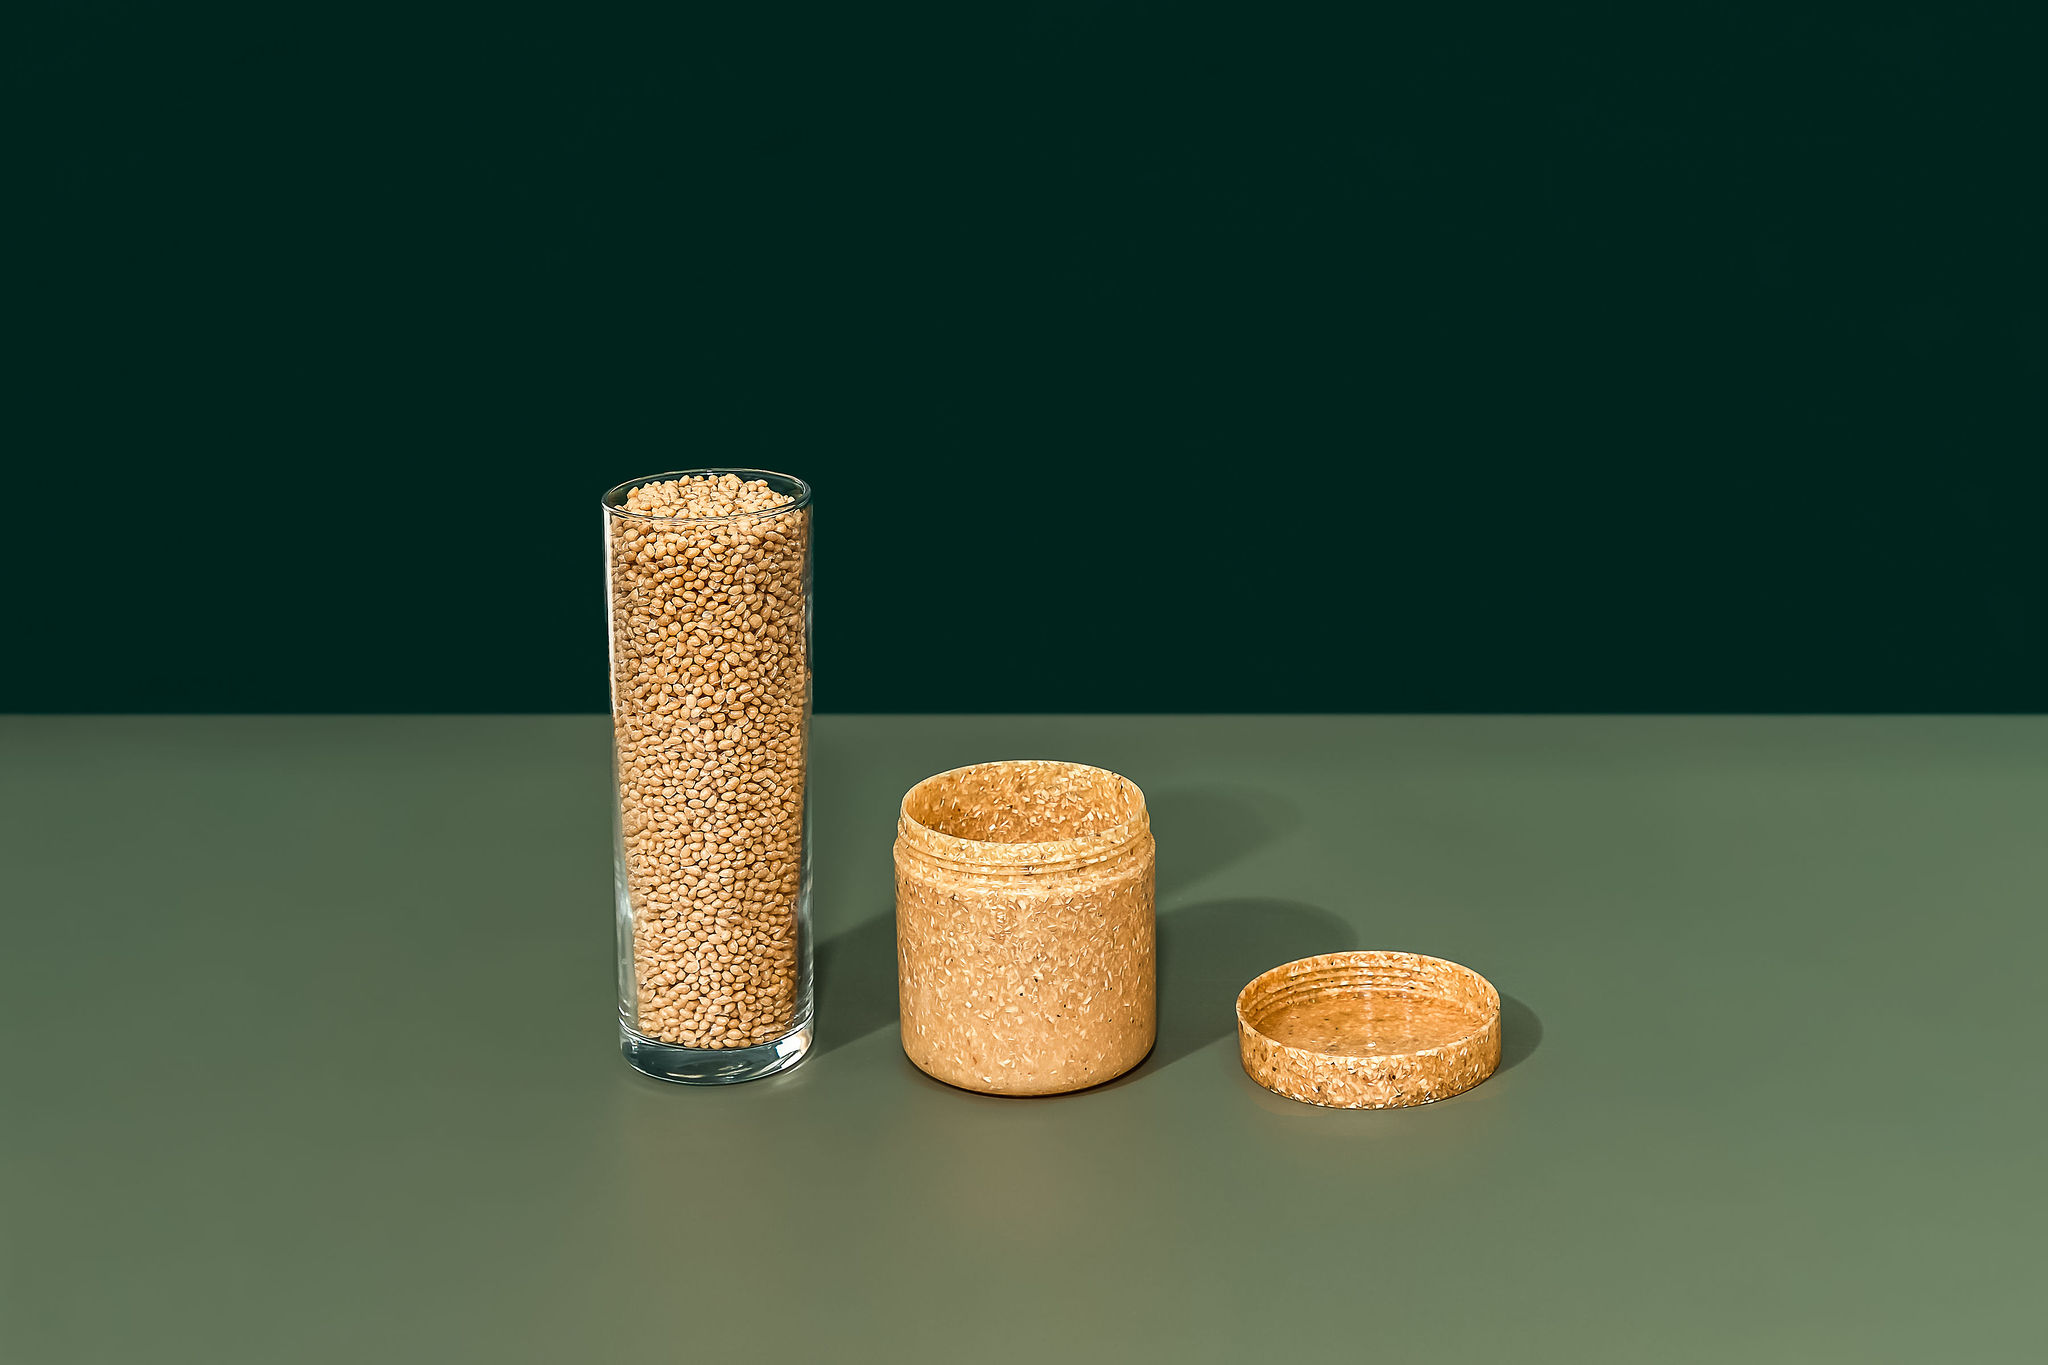 Sulapac® is an internationally awarded sustainable material innovation that can replace conventional plastic. It biodegrades without leaving permanent microplastics behind. Sulapac is beautiful, functional and sustainable. Like nature.